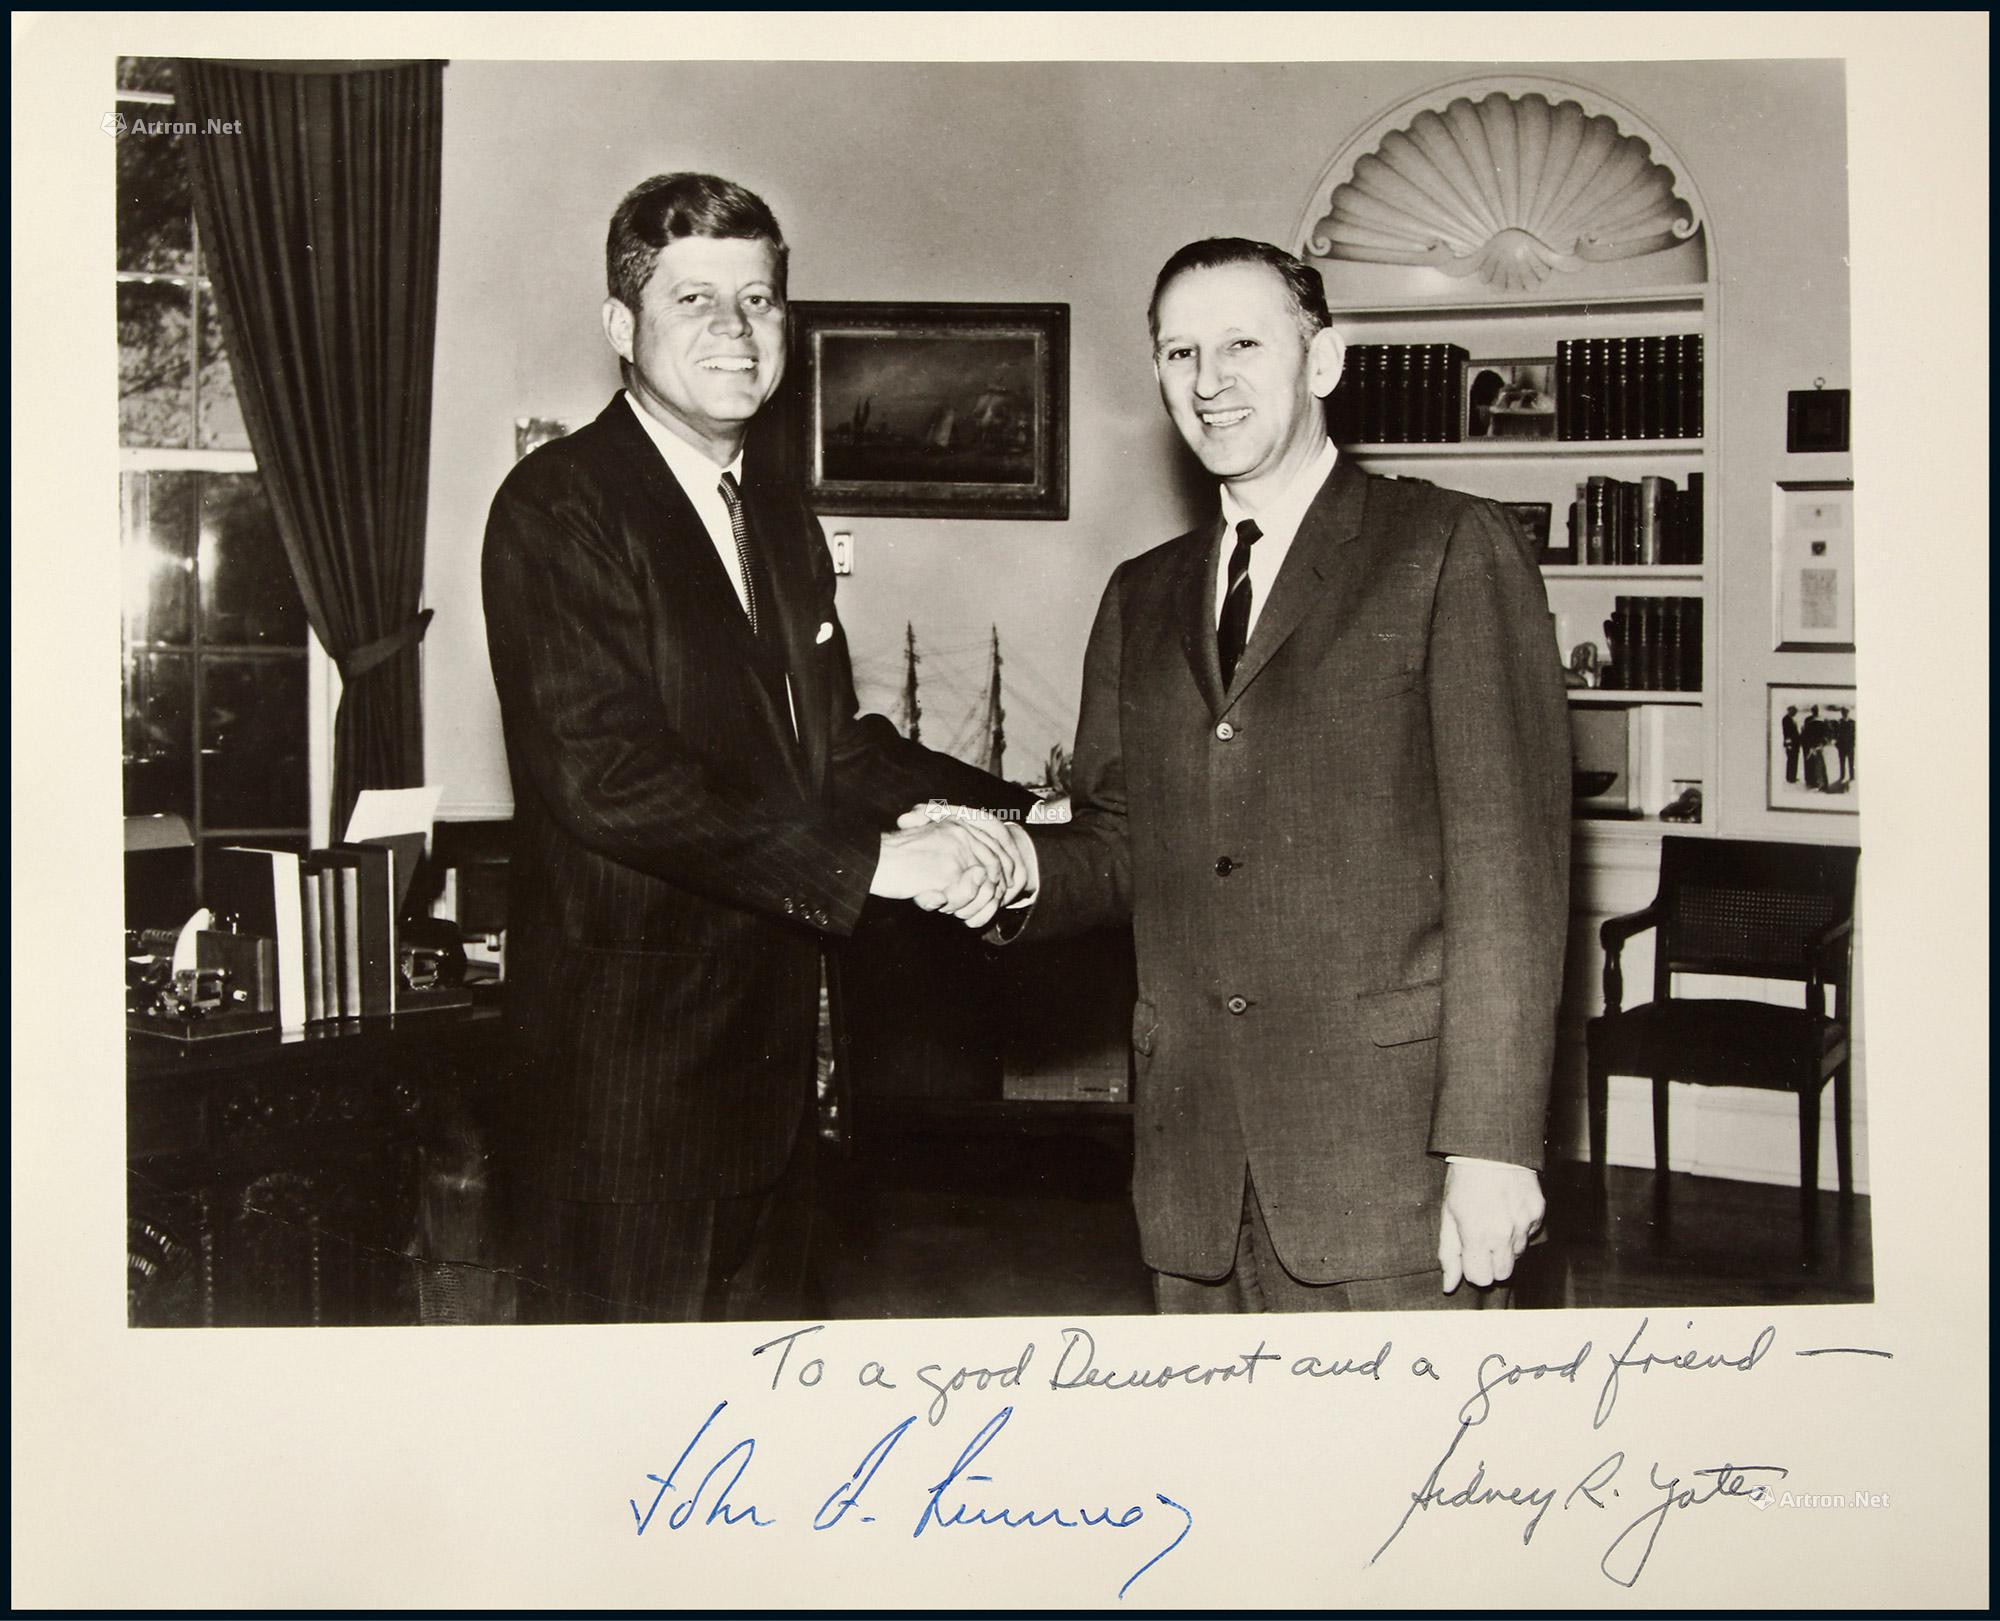 Jointly autographed photo by The 35th President of the United States John Kennedy and Representative from Illinois Sidney Yates, with COA